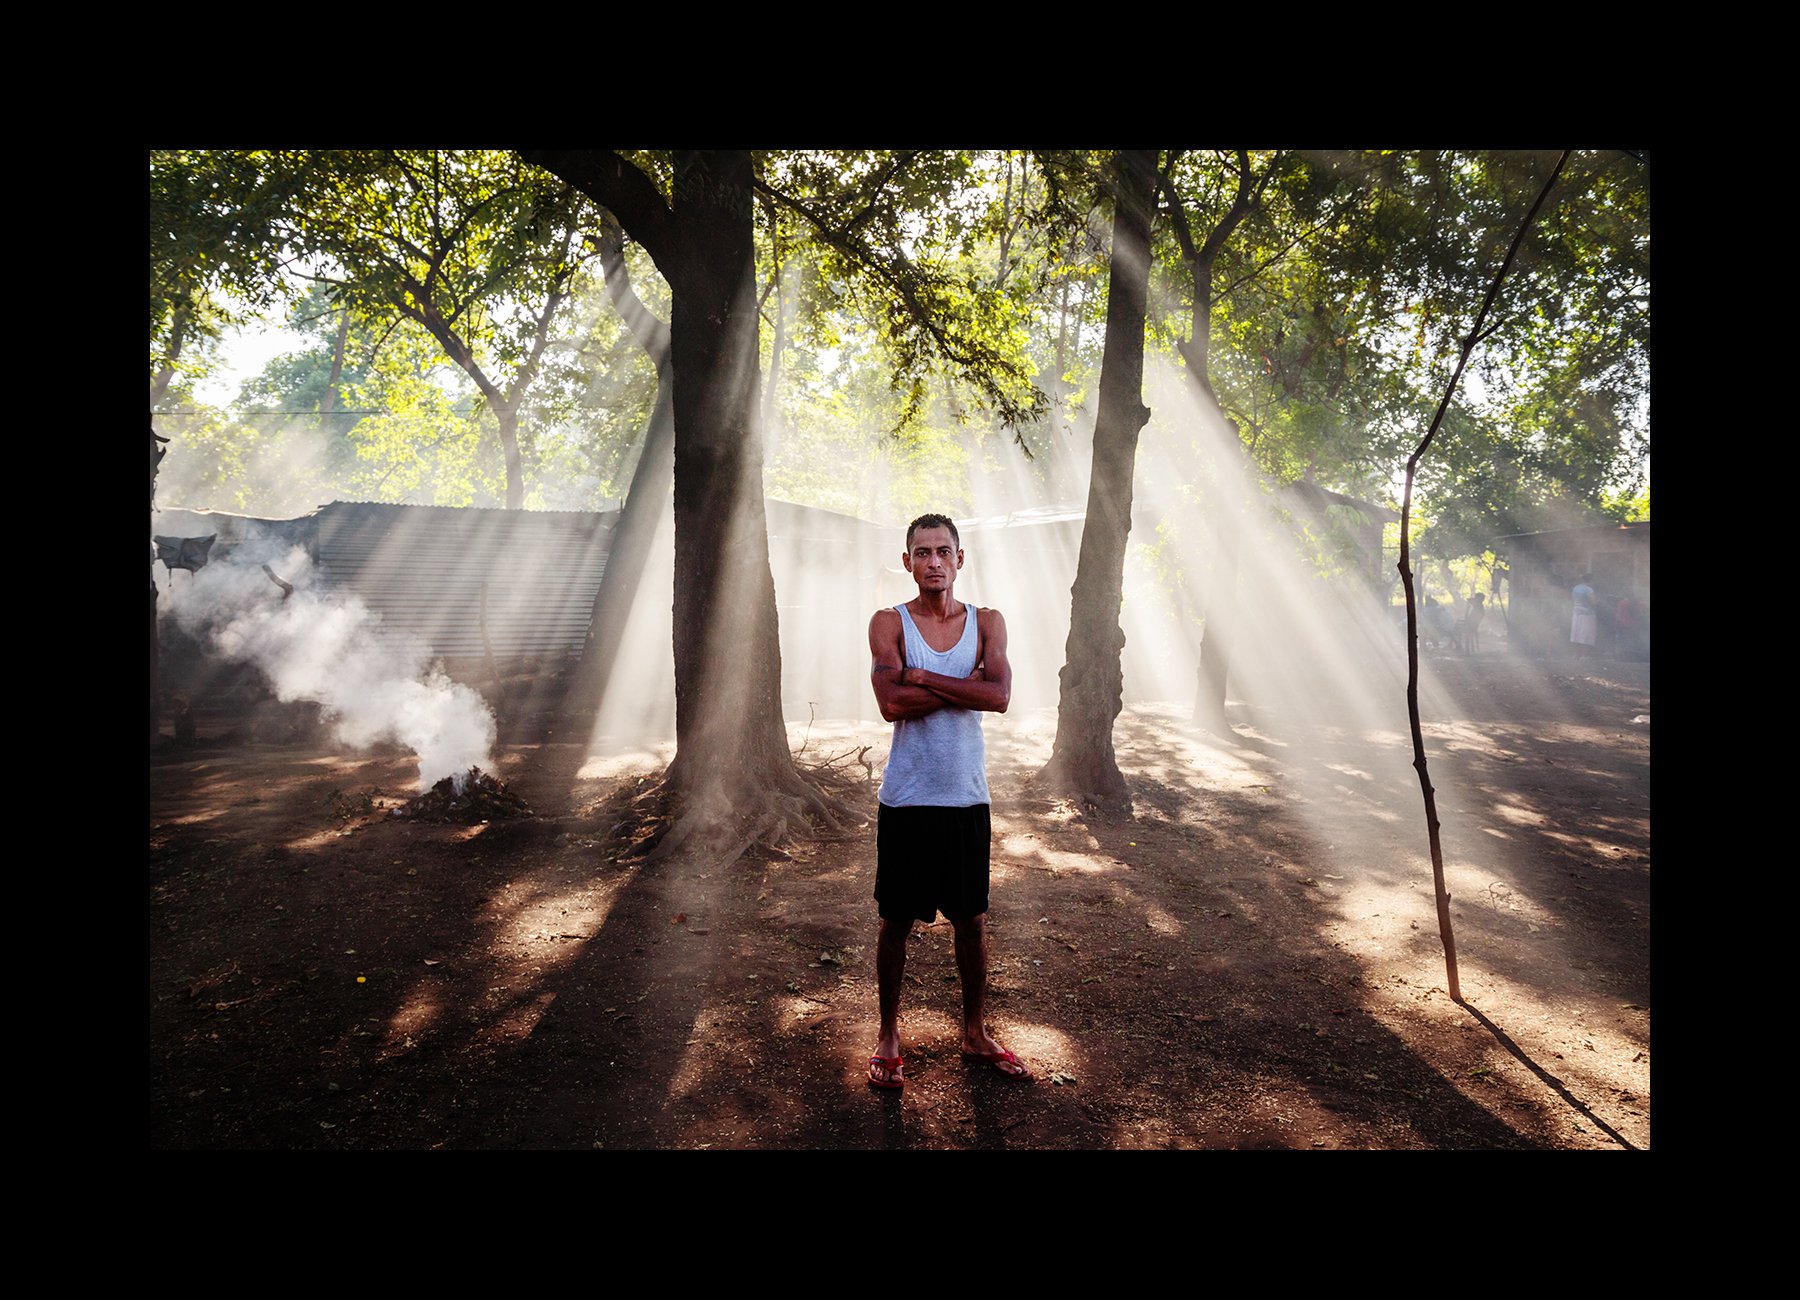  Walter Arsenio Rivera, 29, a sugarcane worker suffering from CKDnT, poses for a portrait in Chichigalpa, Nicaragua on Jan. 7, 2015. 